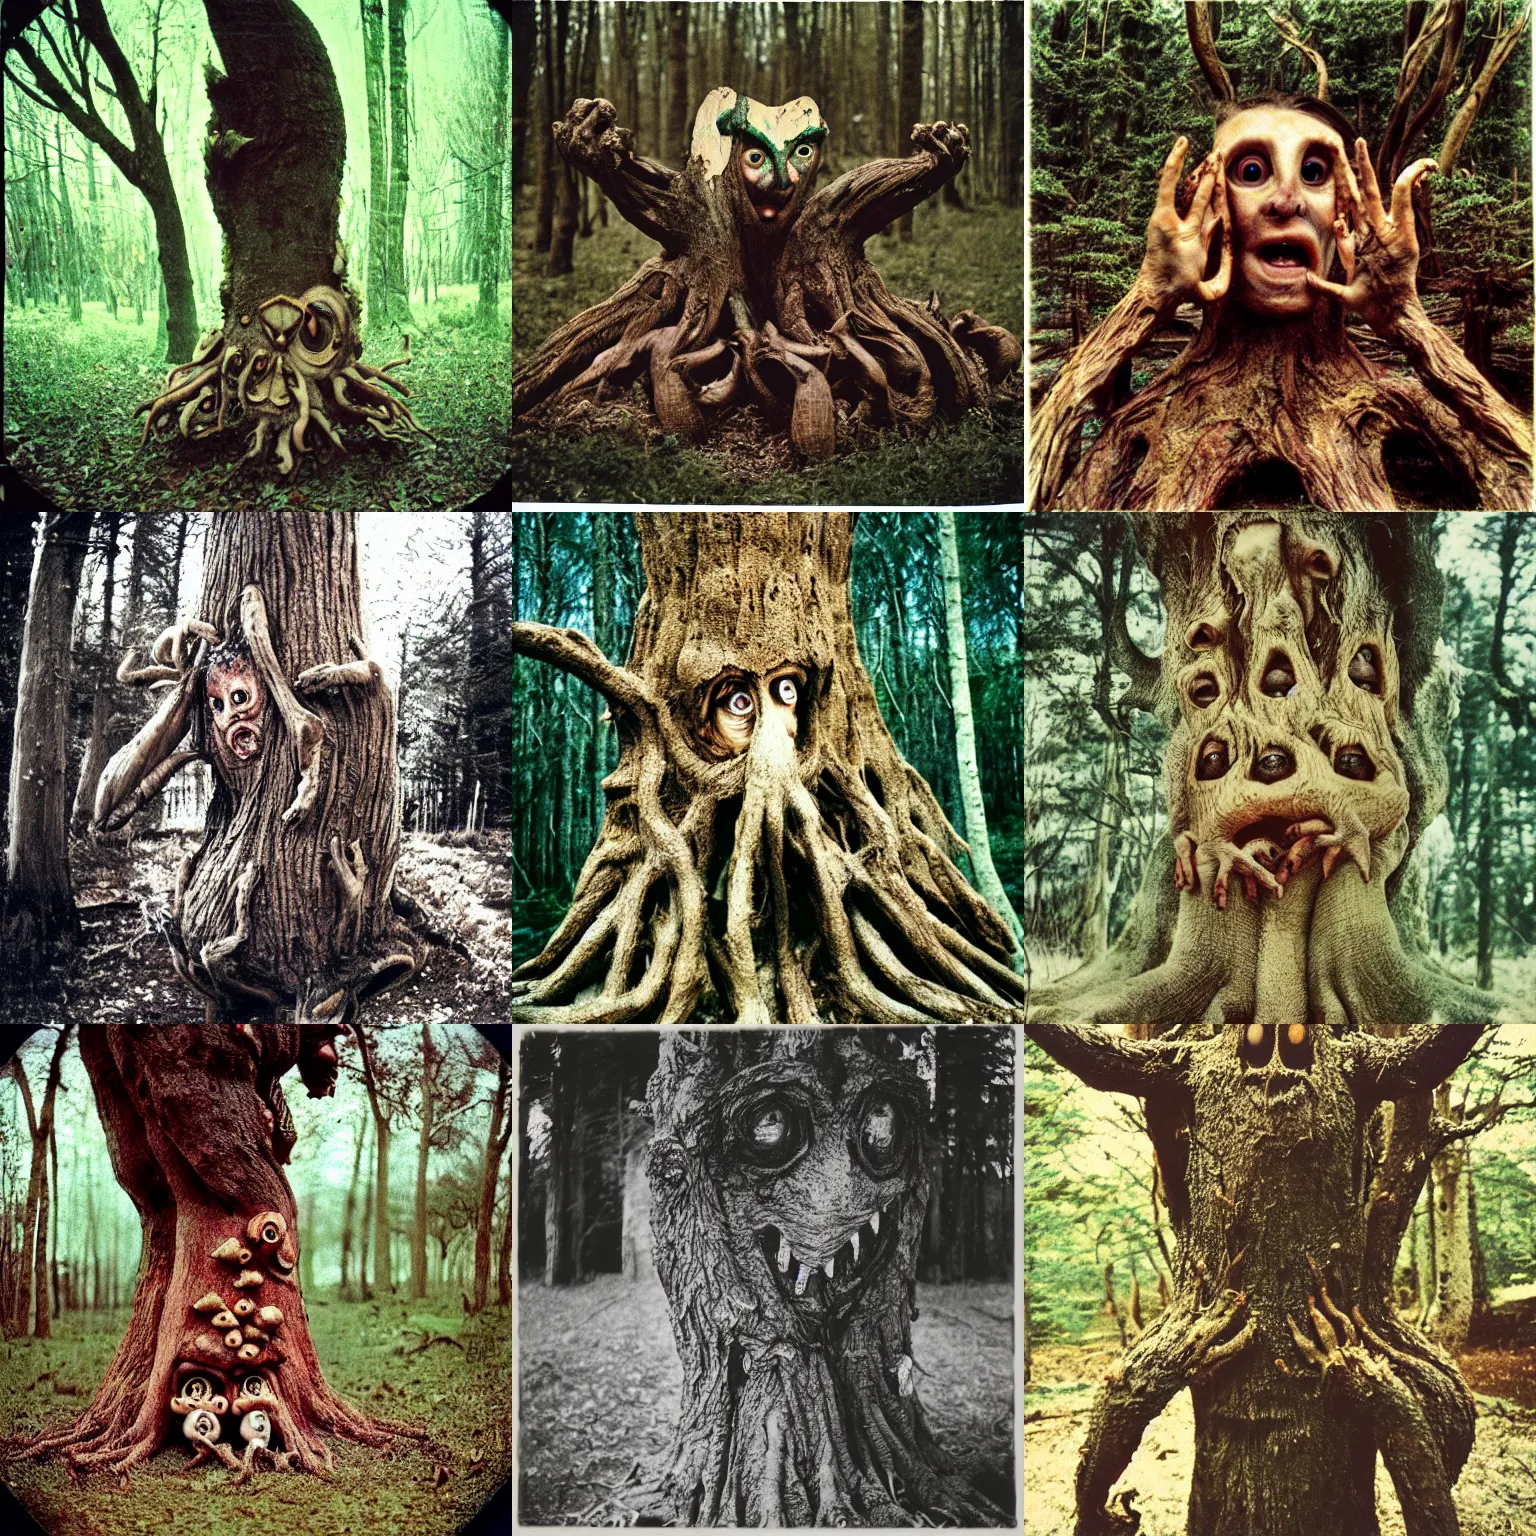 Prompt: a terrifying tree monster with distorted faces made of bark gorging itself on mushrooms, lovecratftian horror, pans labyrinth, shot on expired instamatic film